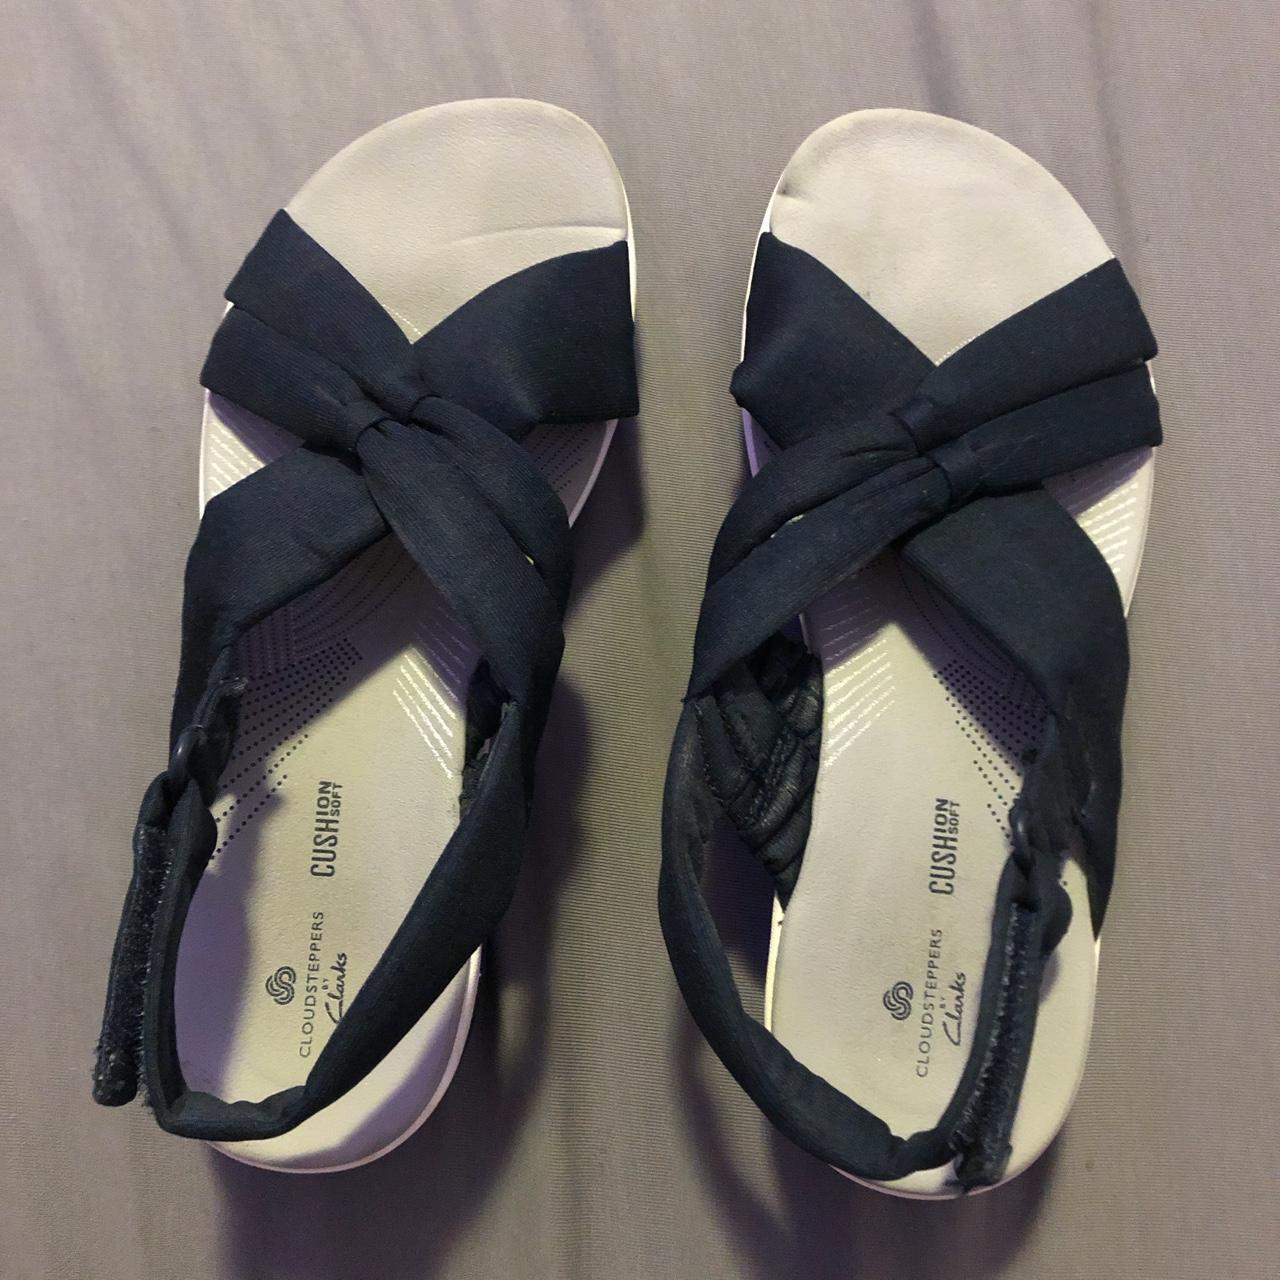 Navy blue and gray comfy sandal shoes! - Depop